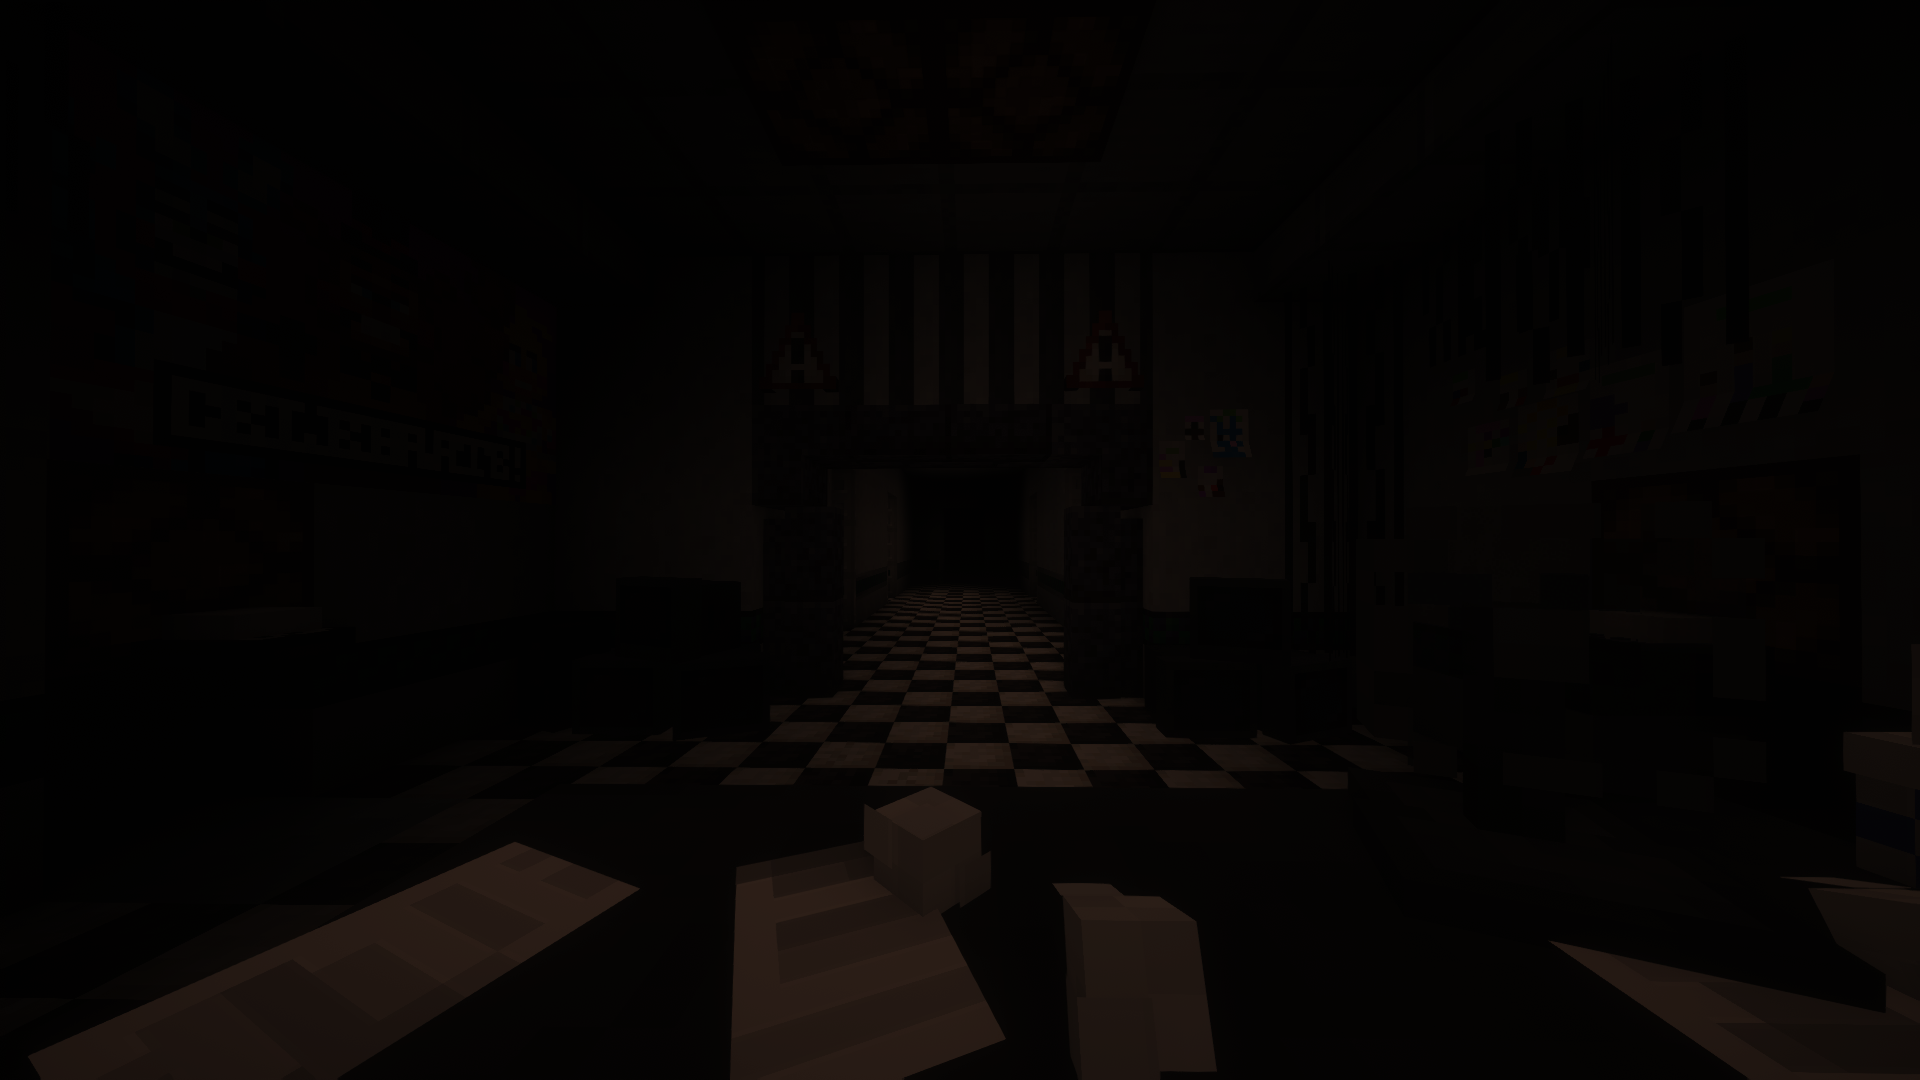 Five Nights at Freddy's 3 ADDON in Minecraft Pocket Edition 1.19 NEW UPDATE  